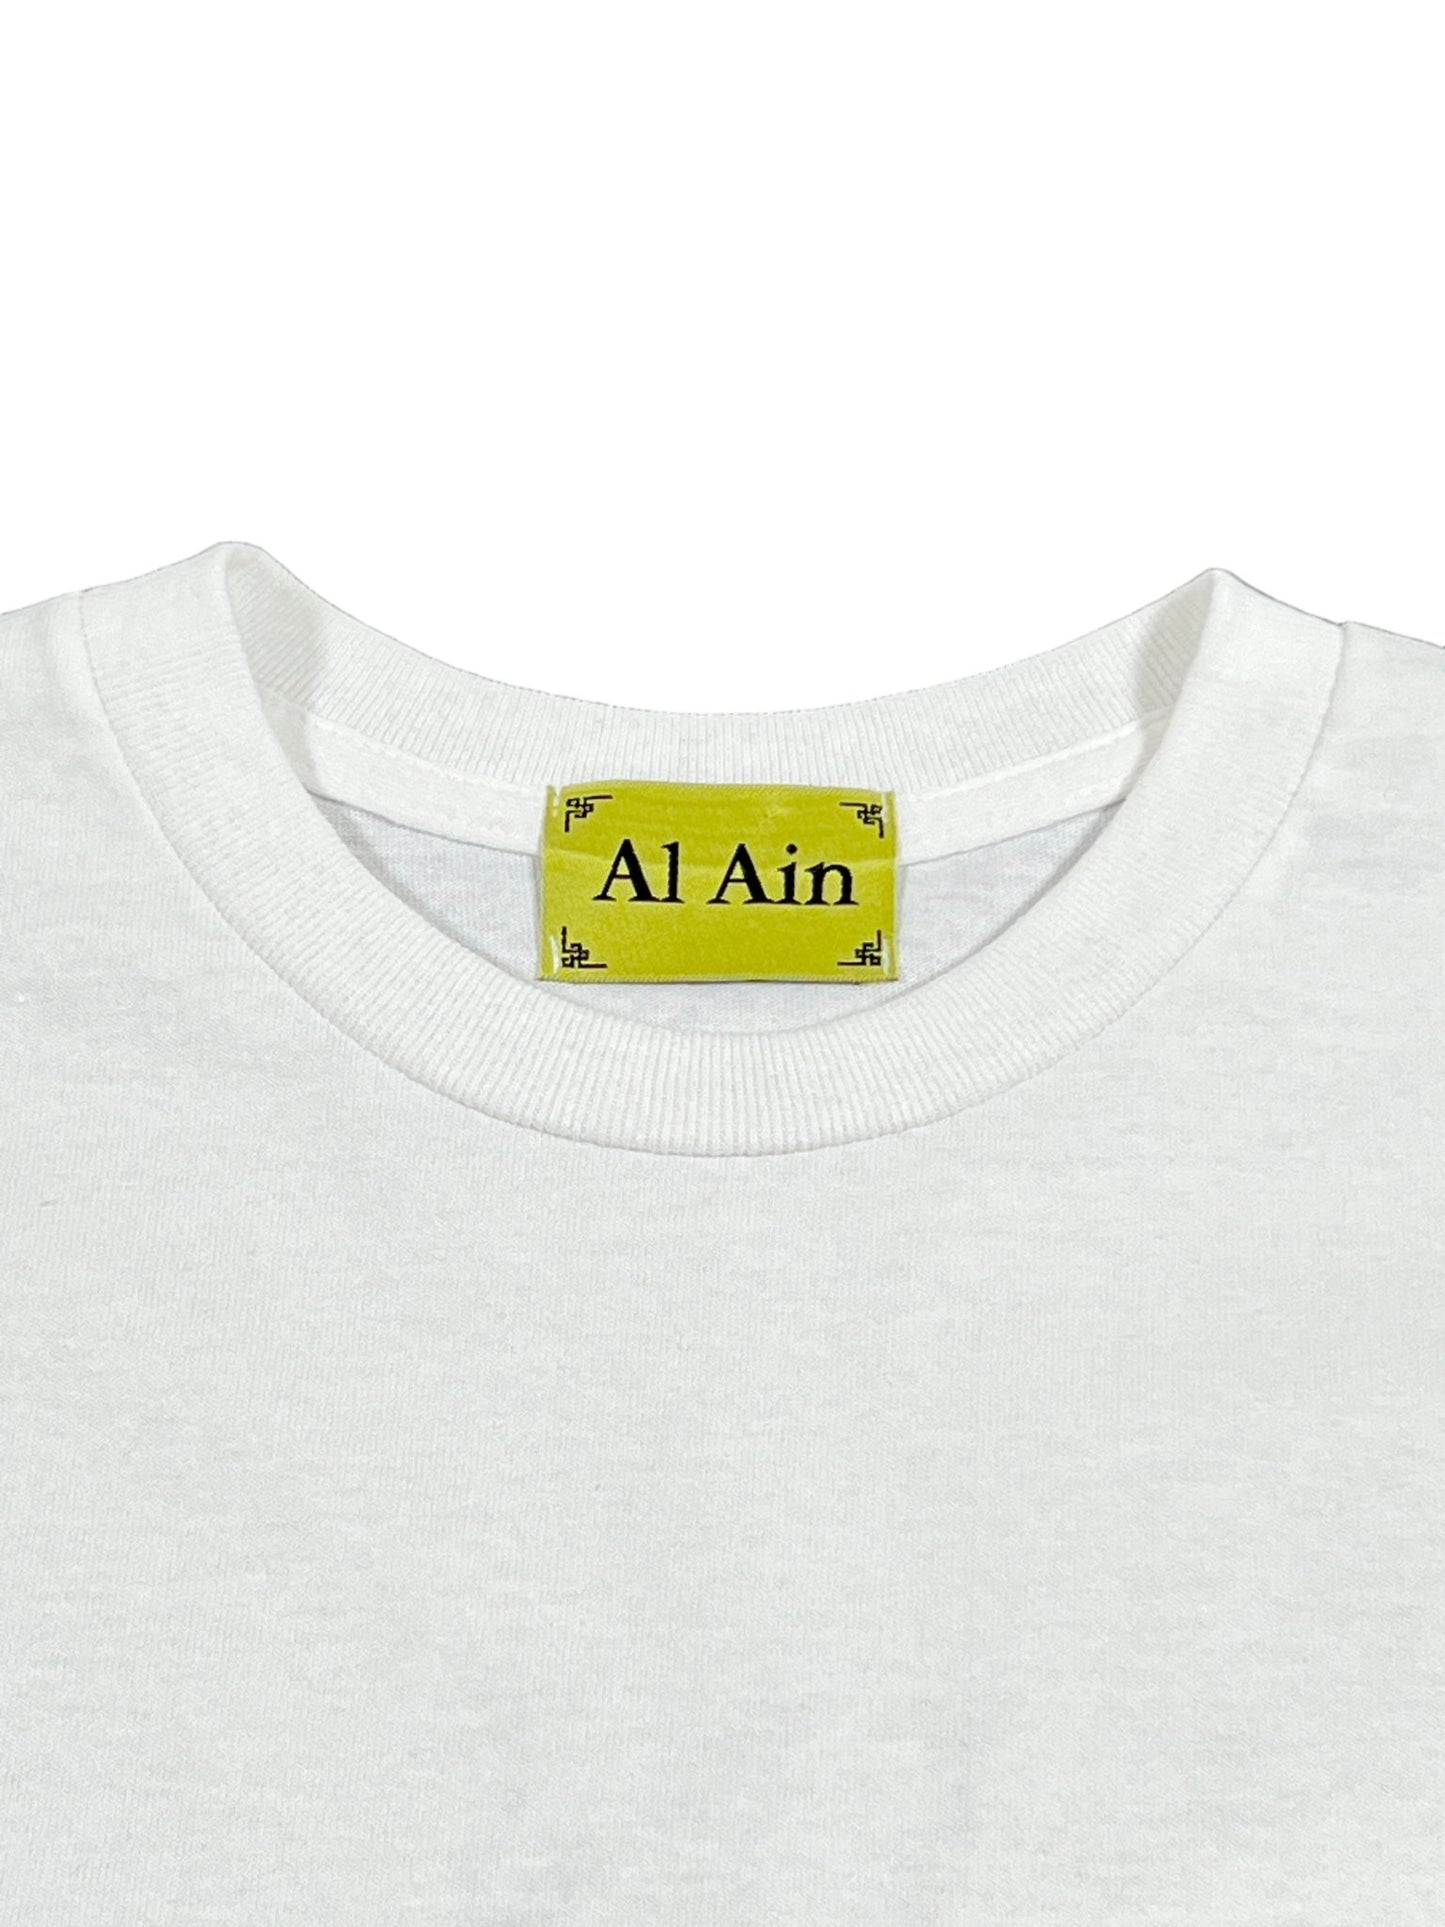 White T-shirt with a large graphic detail featuring a green label displaying the product name "AL AIN AMHX S121 PEACOCK BLANC" and brand name "AL AIN.